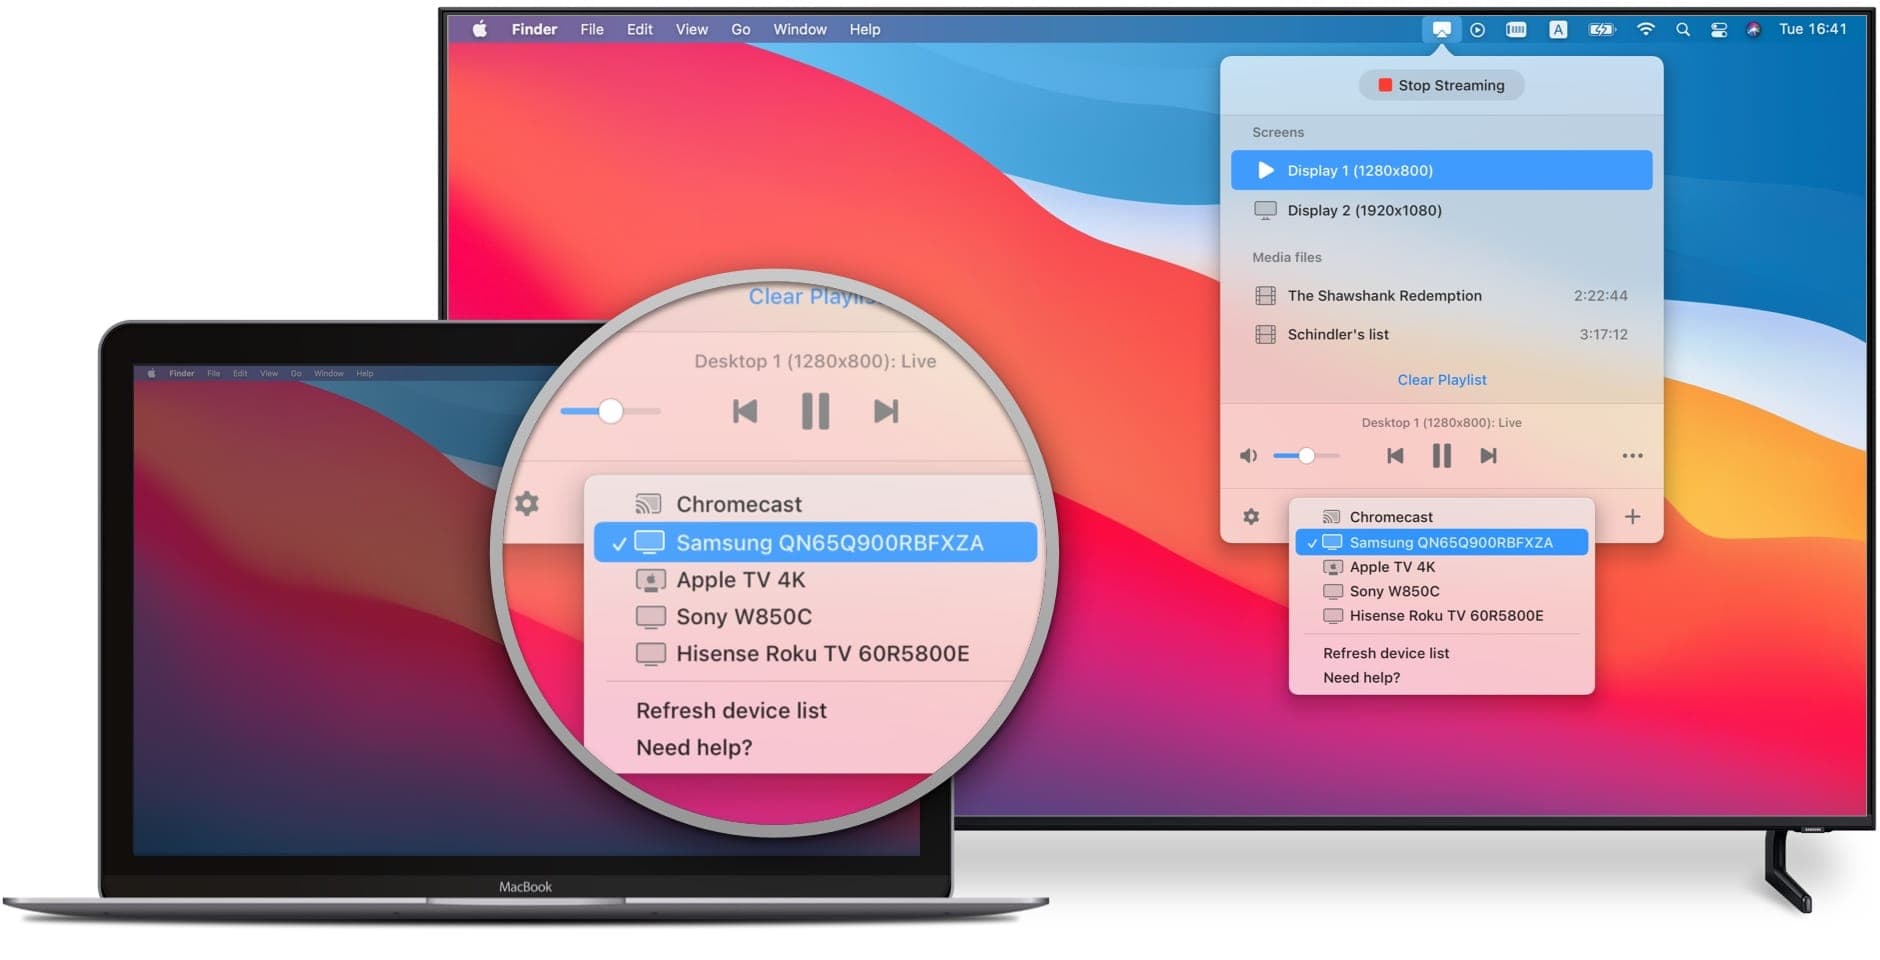 JustStream app offers alternative way of screen mirroring your Mac to a Sony TV.